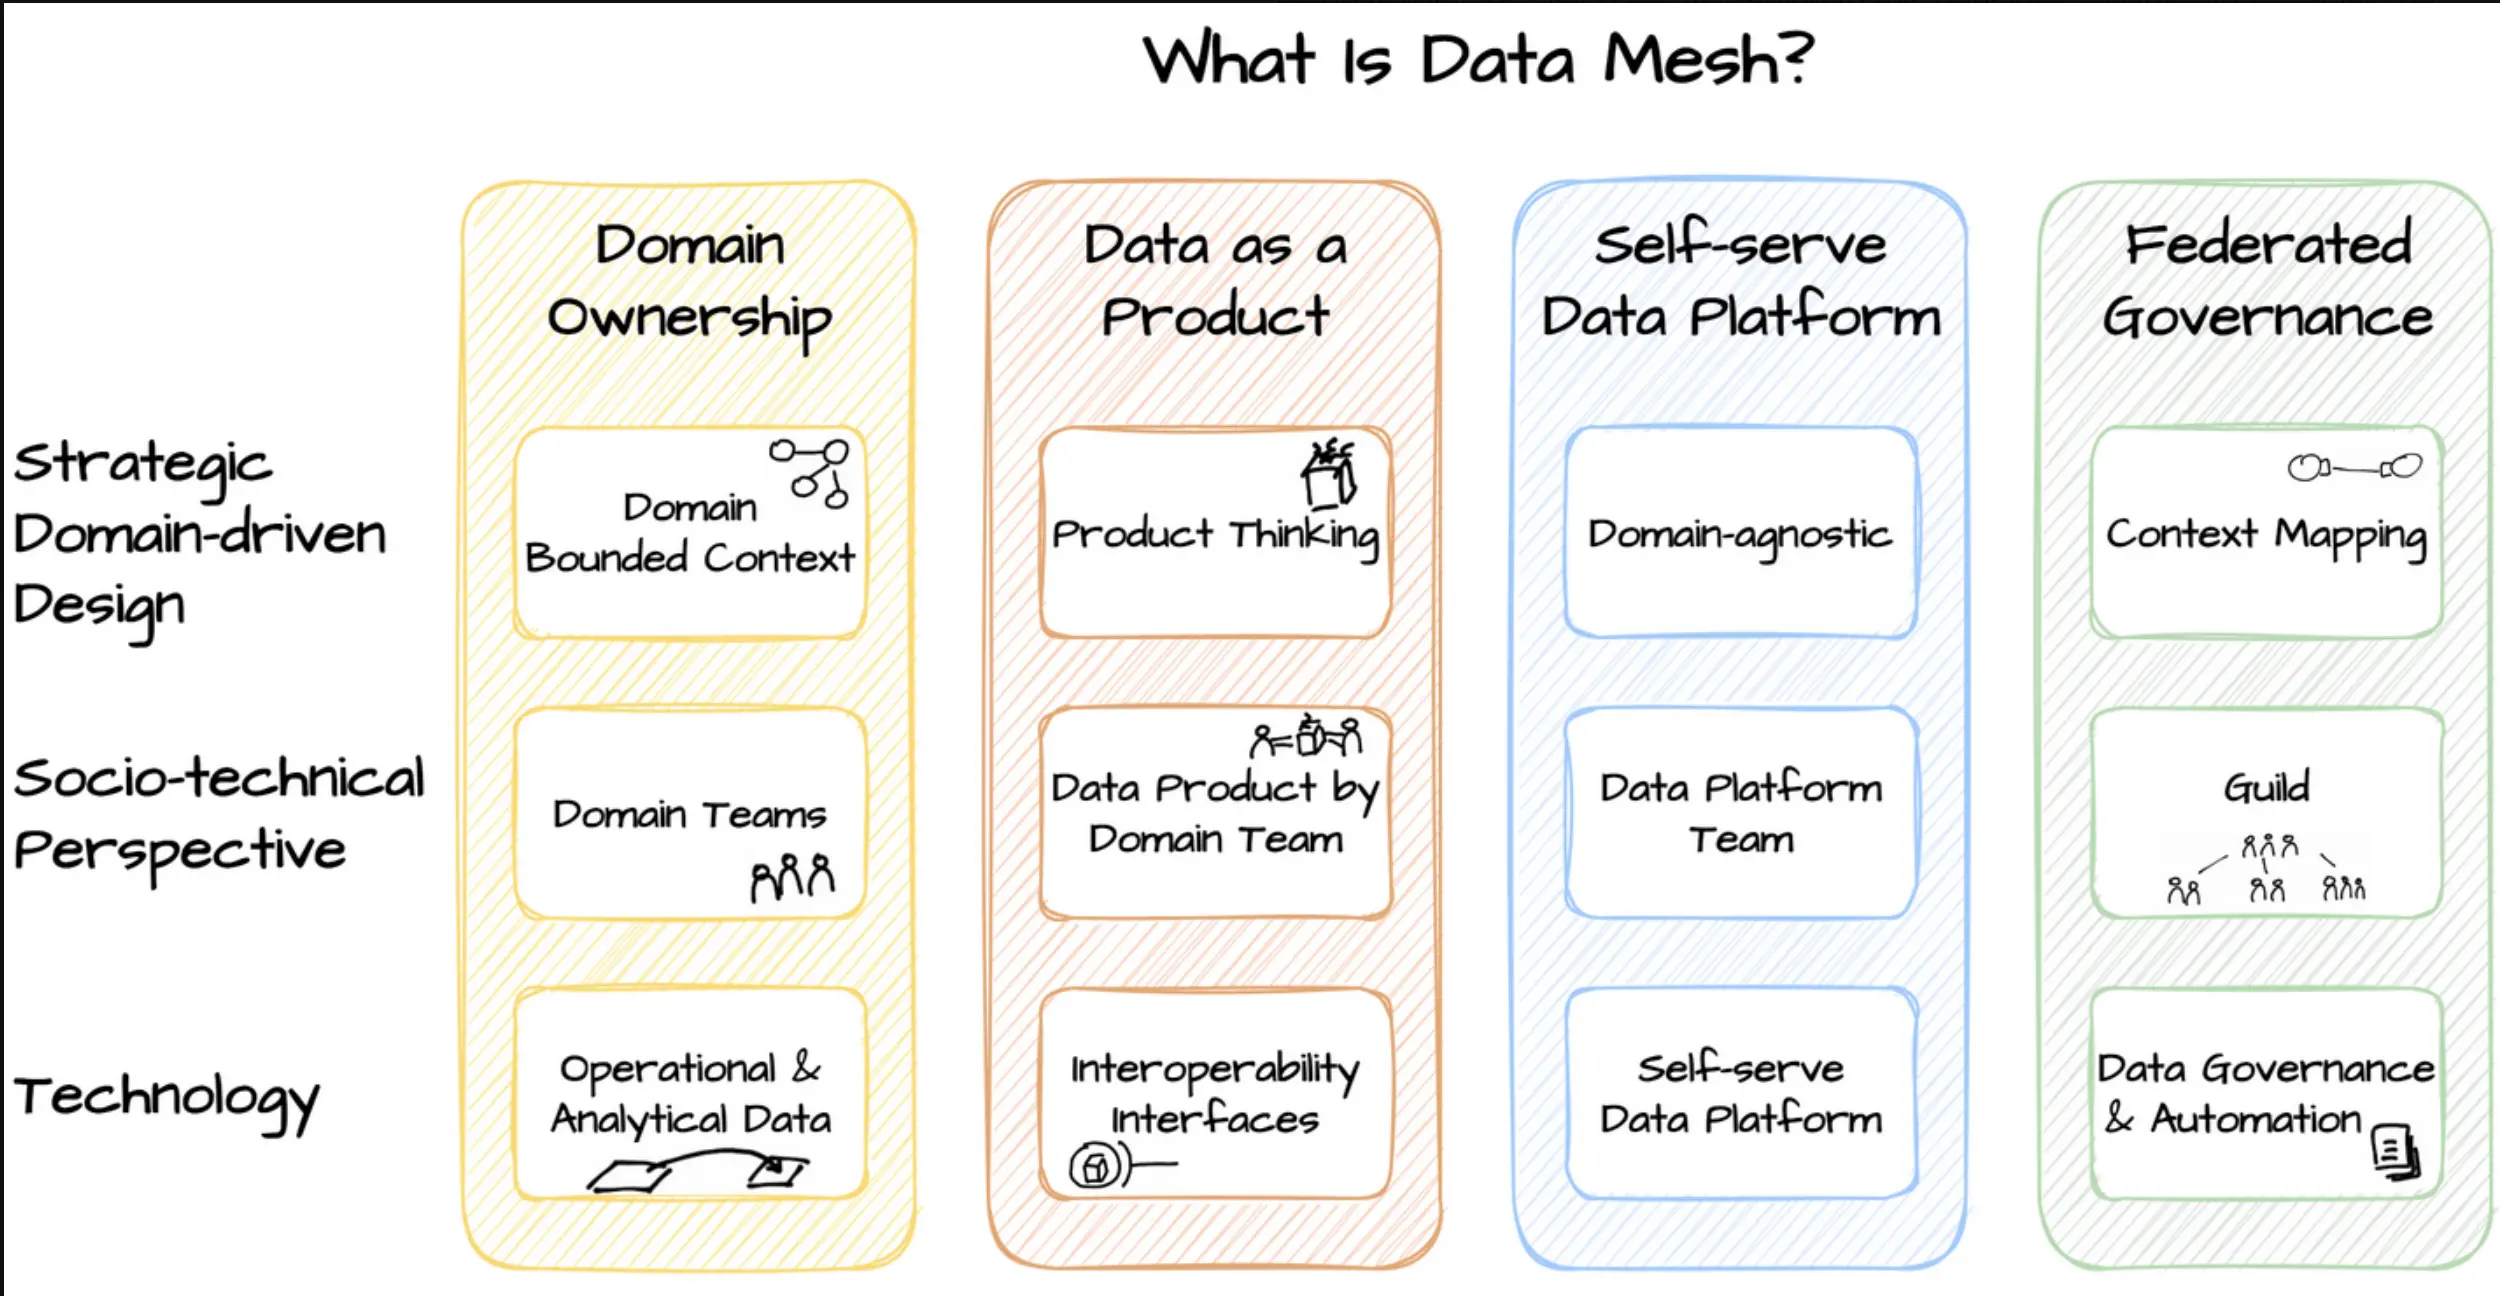 The four fundamental principles of the data mesh approach